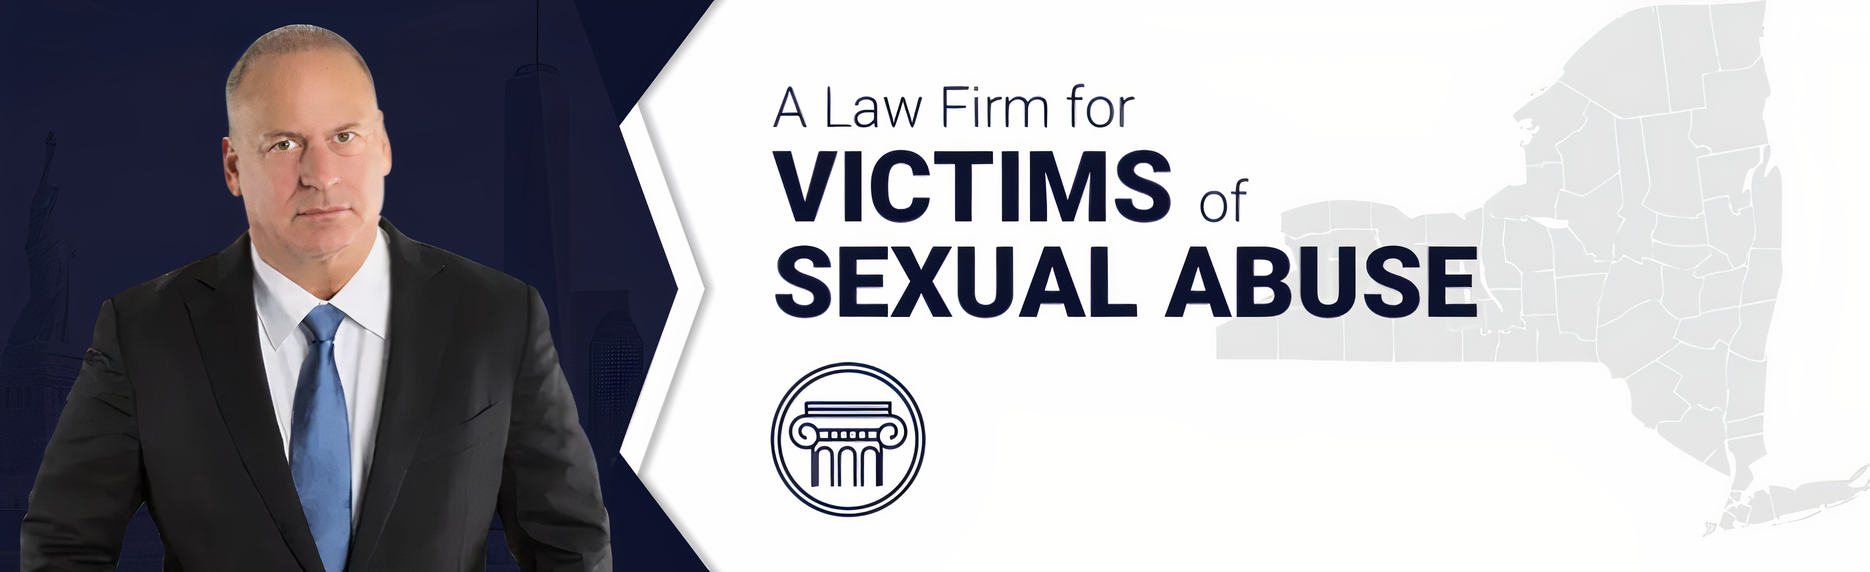 A Law Firm for Victims of Sexual Abuse - Banner